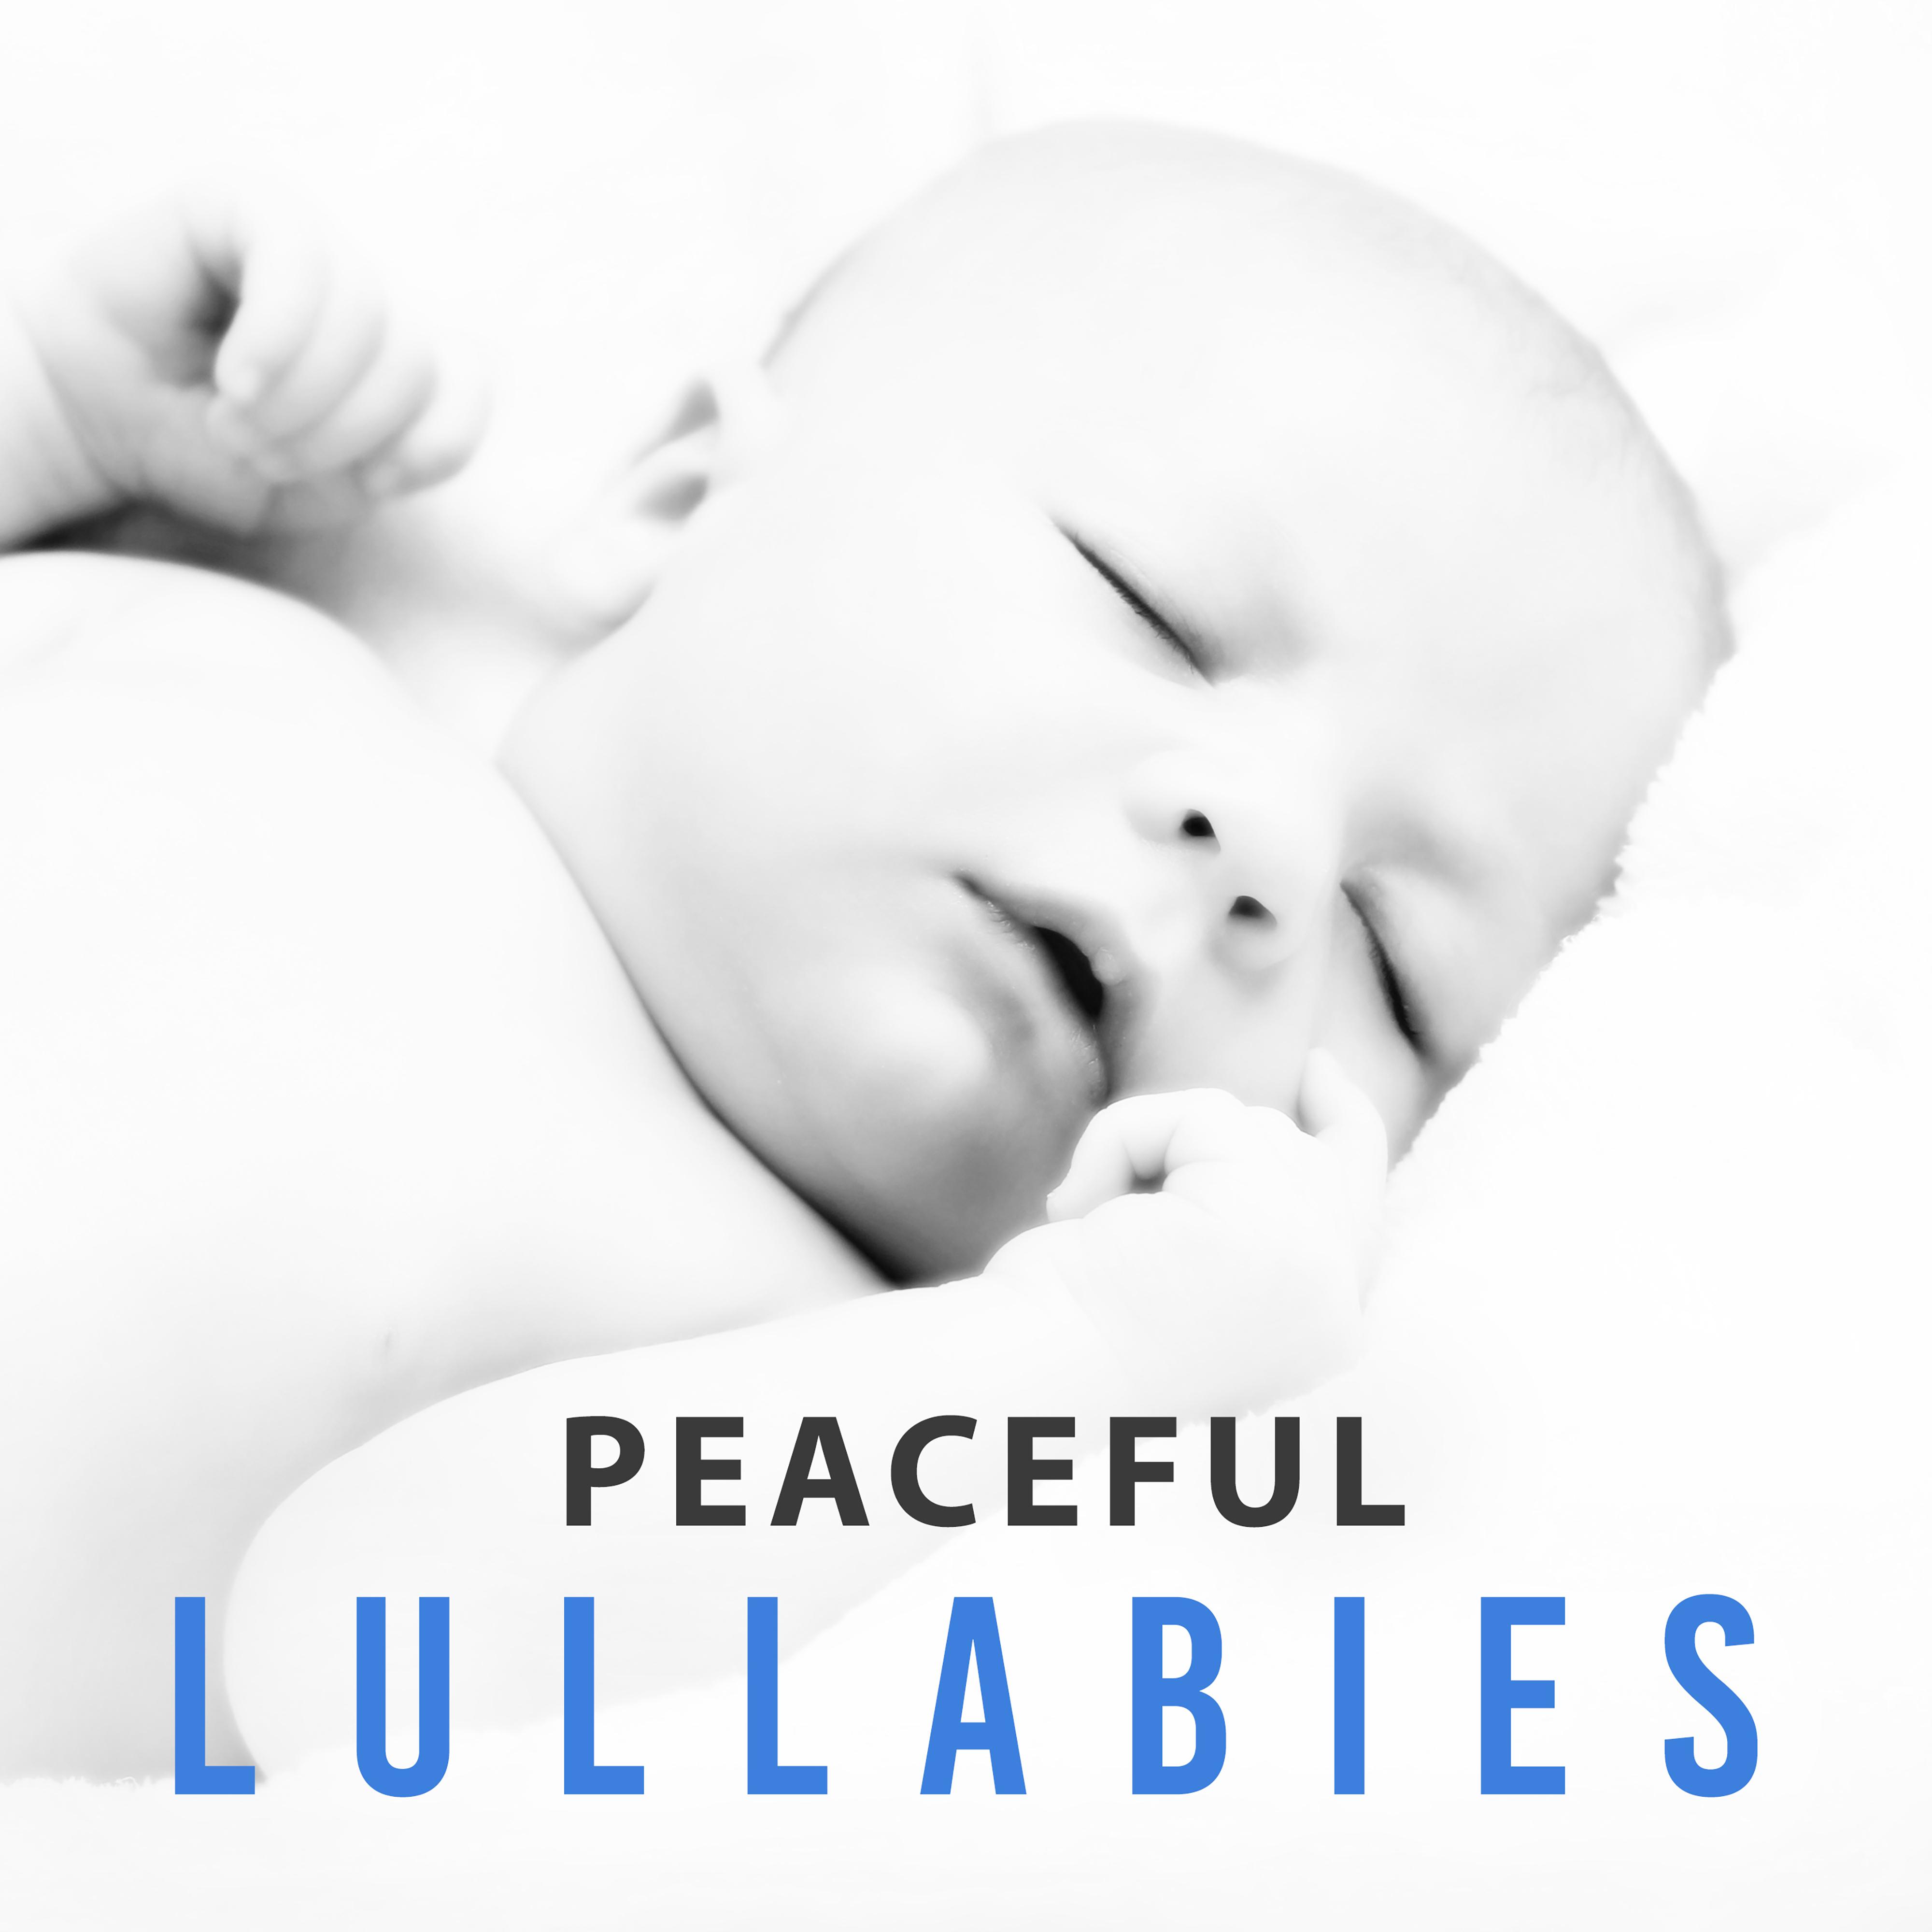 Peaceful Lullabies  Relaxation Songs for Baby, Time to Sleep, Bedtime, Deep Sleep, Instrumental Melodies